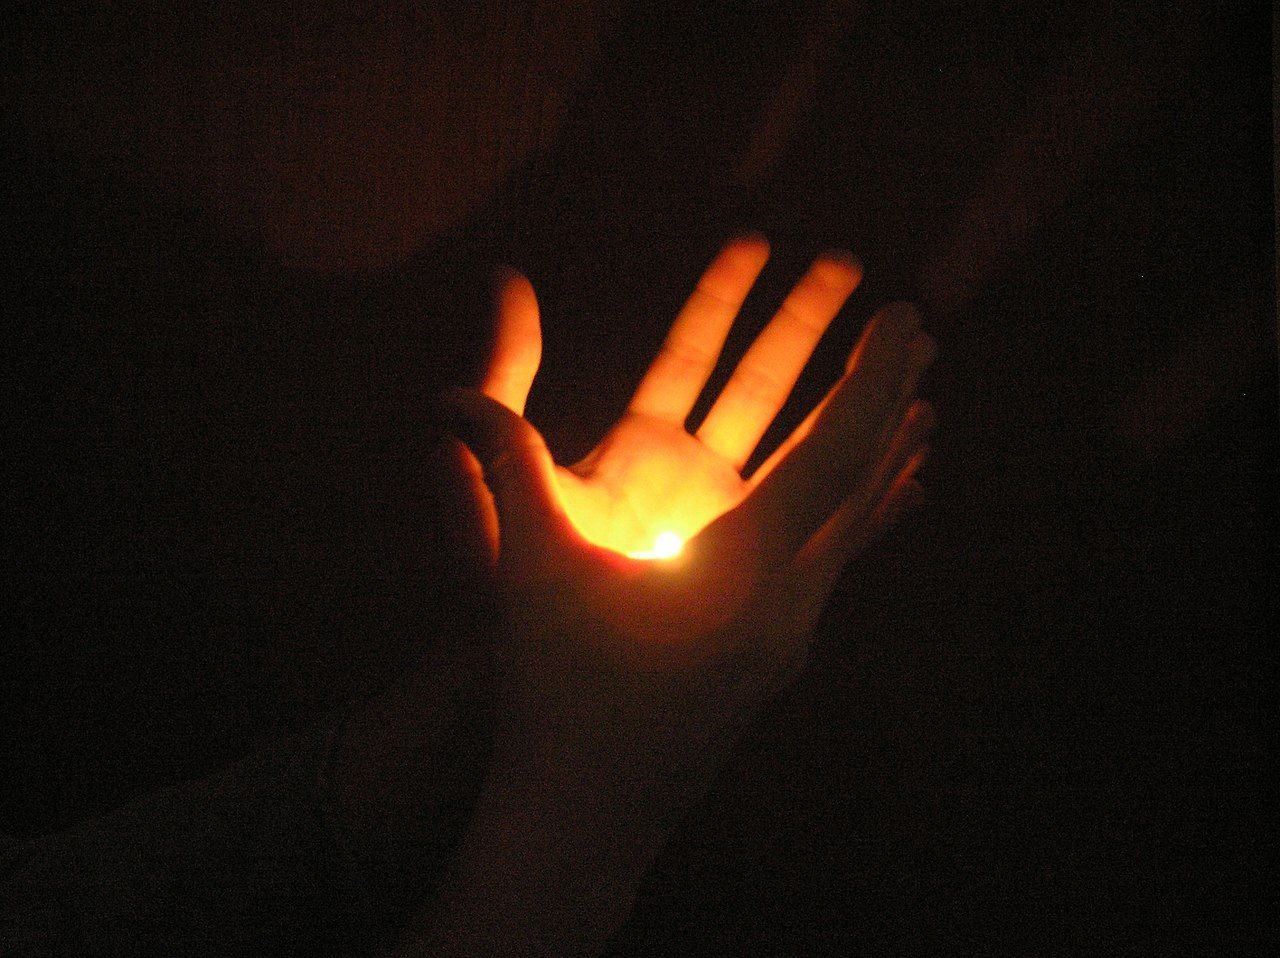 An amateur “flame-in-hand” illusion with a hidden tealight candle.